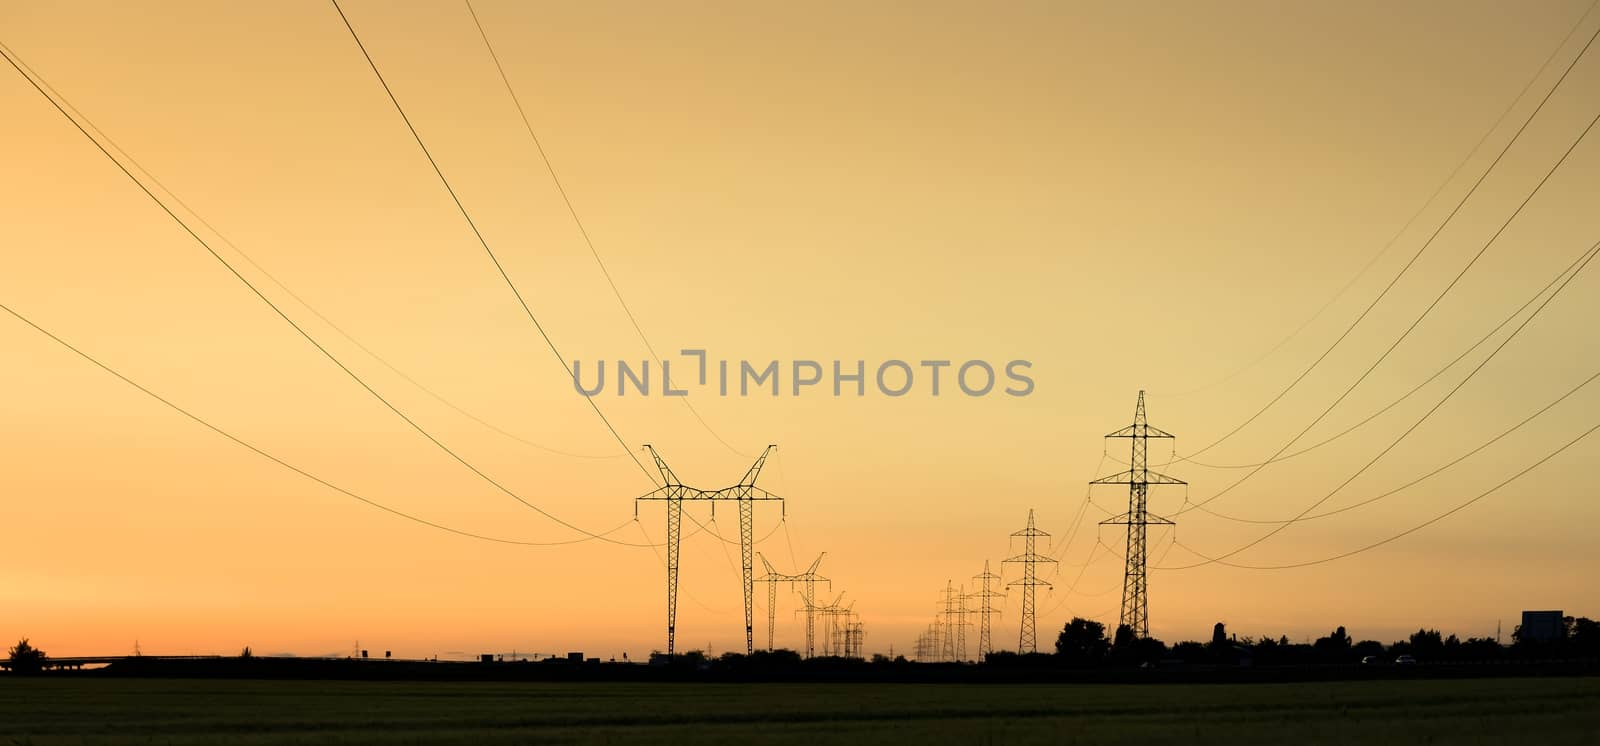 Large transmission towers at sunset by svedoliver